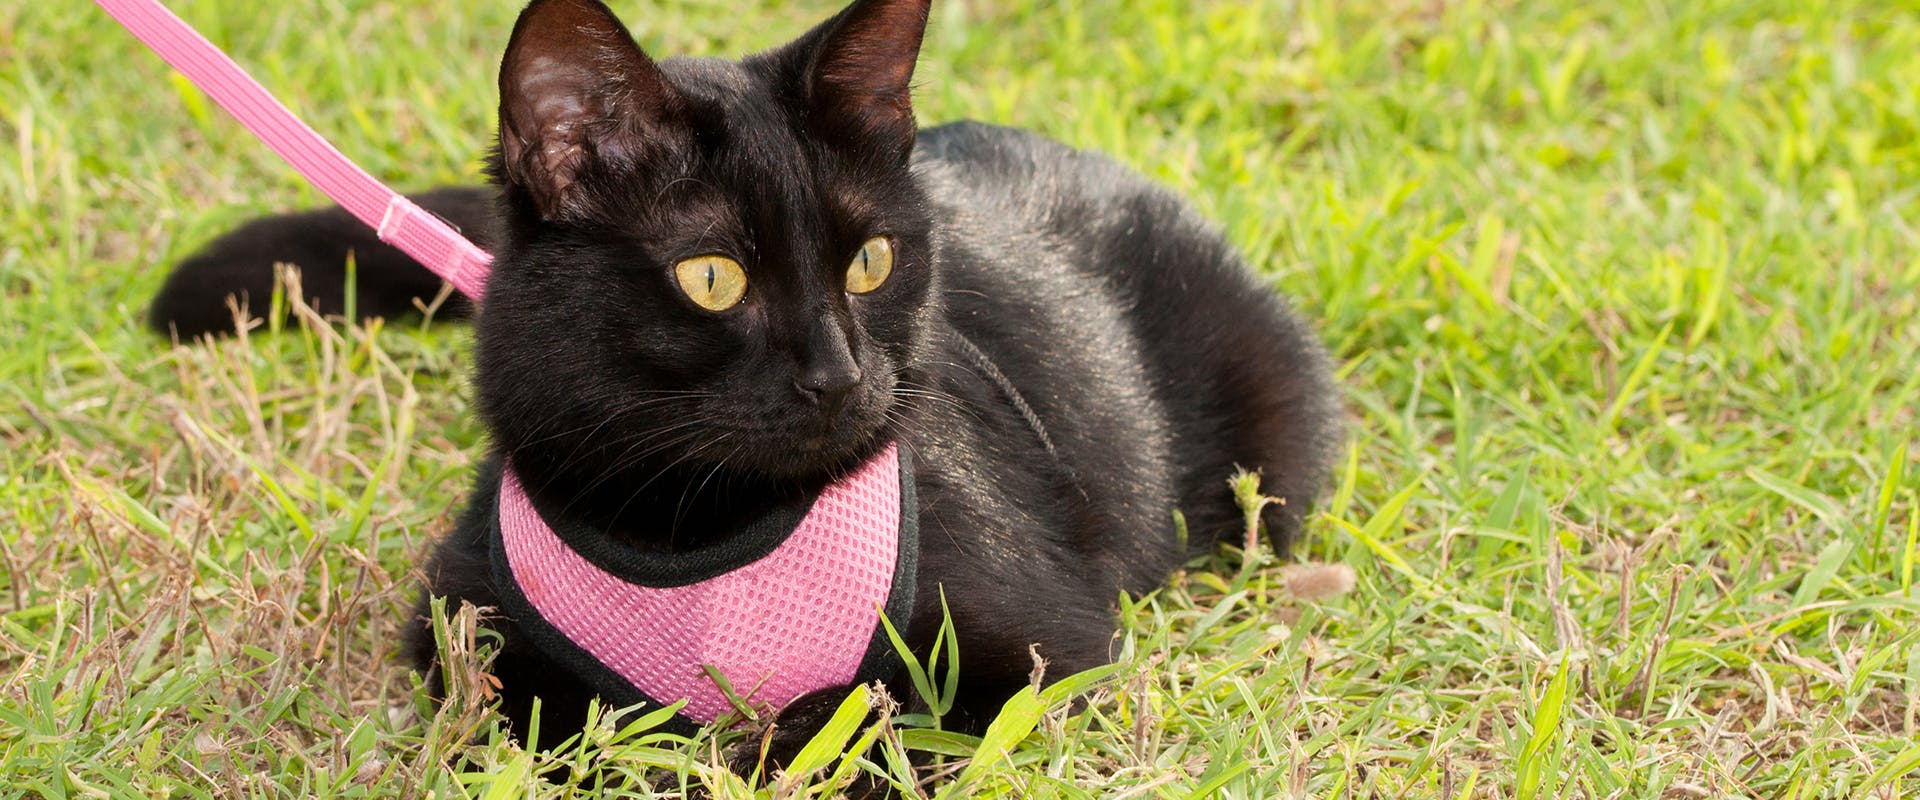 A black cat sitting down in the grass, wearing a bright pink cat harness and leash